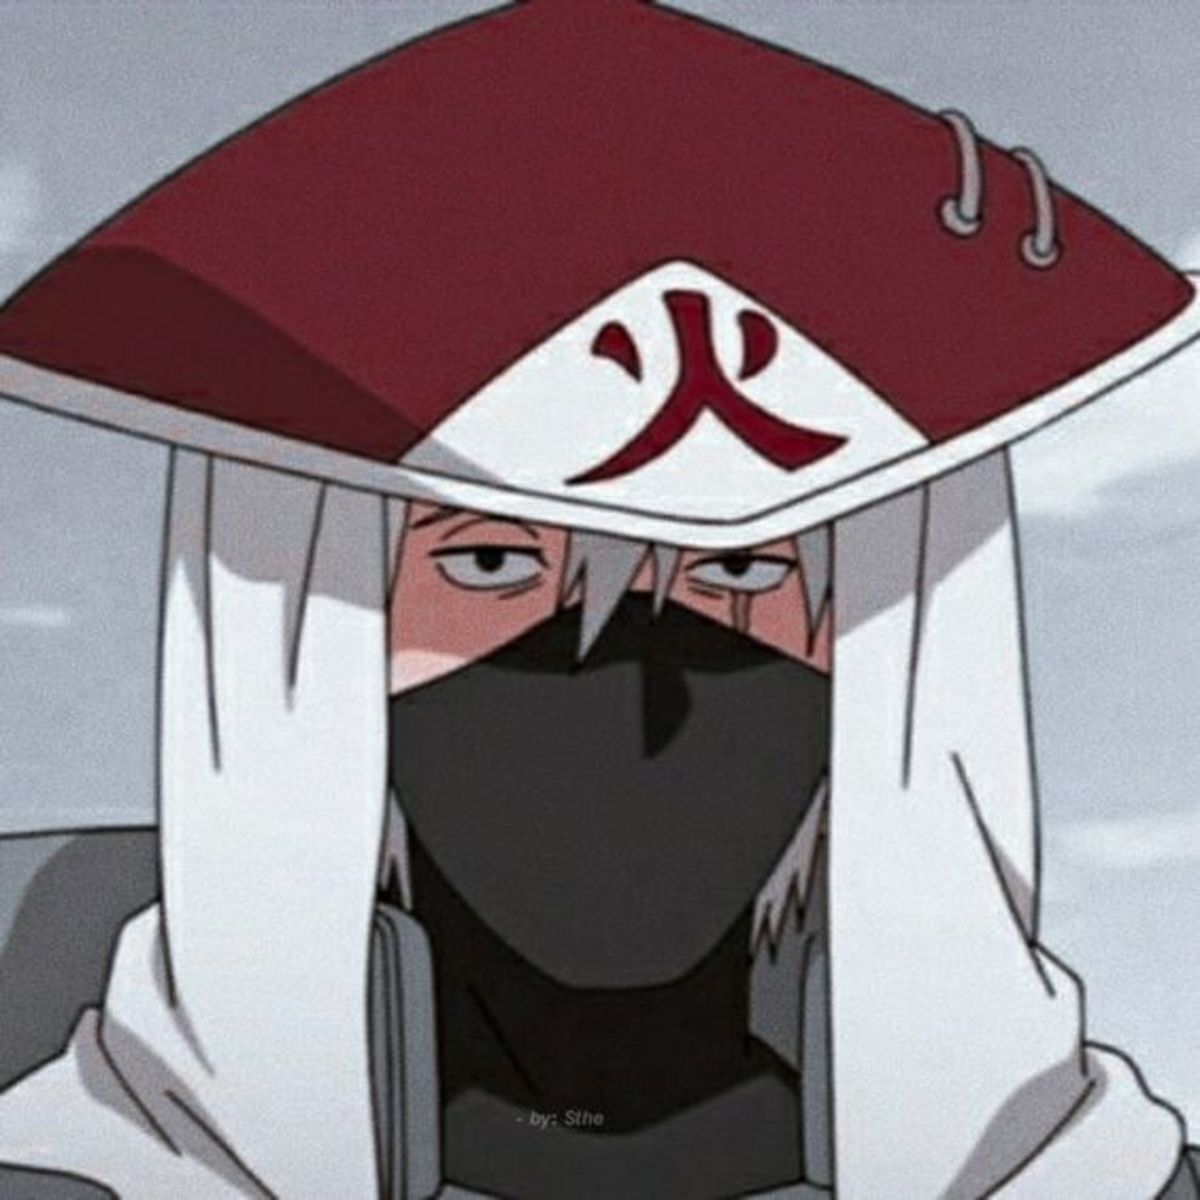 Will Kakashi Replace Naruto? Let's Find It Out!